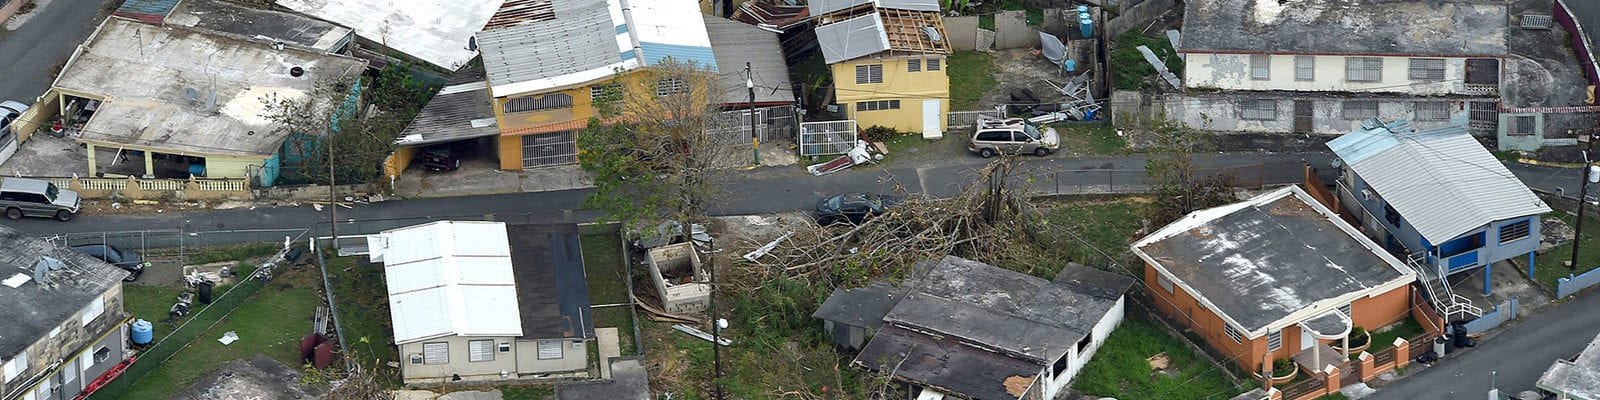 An aerial image of damaged homes and communities in the destructive path Hurricane Maria.